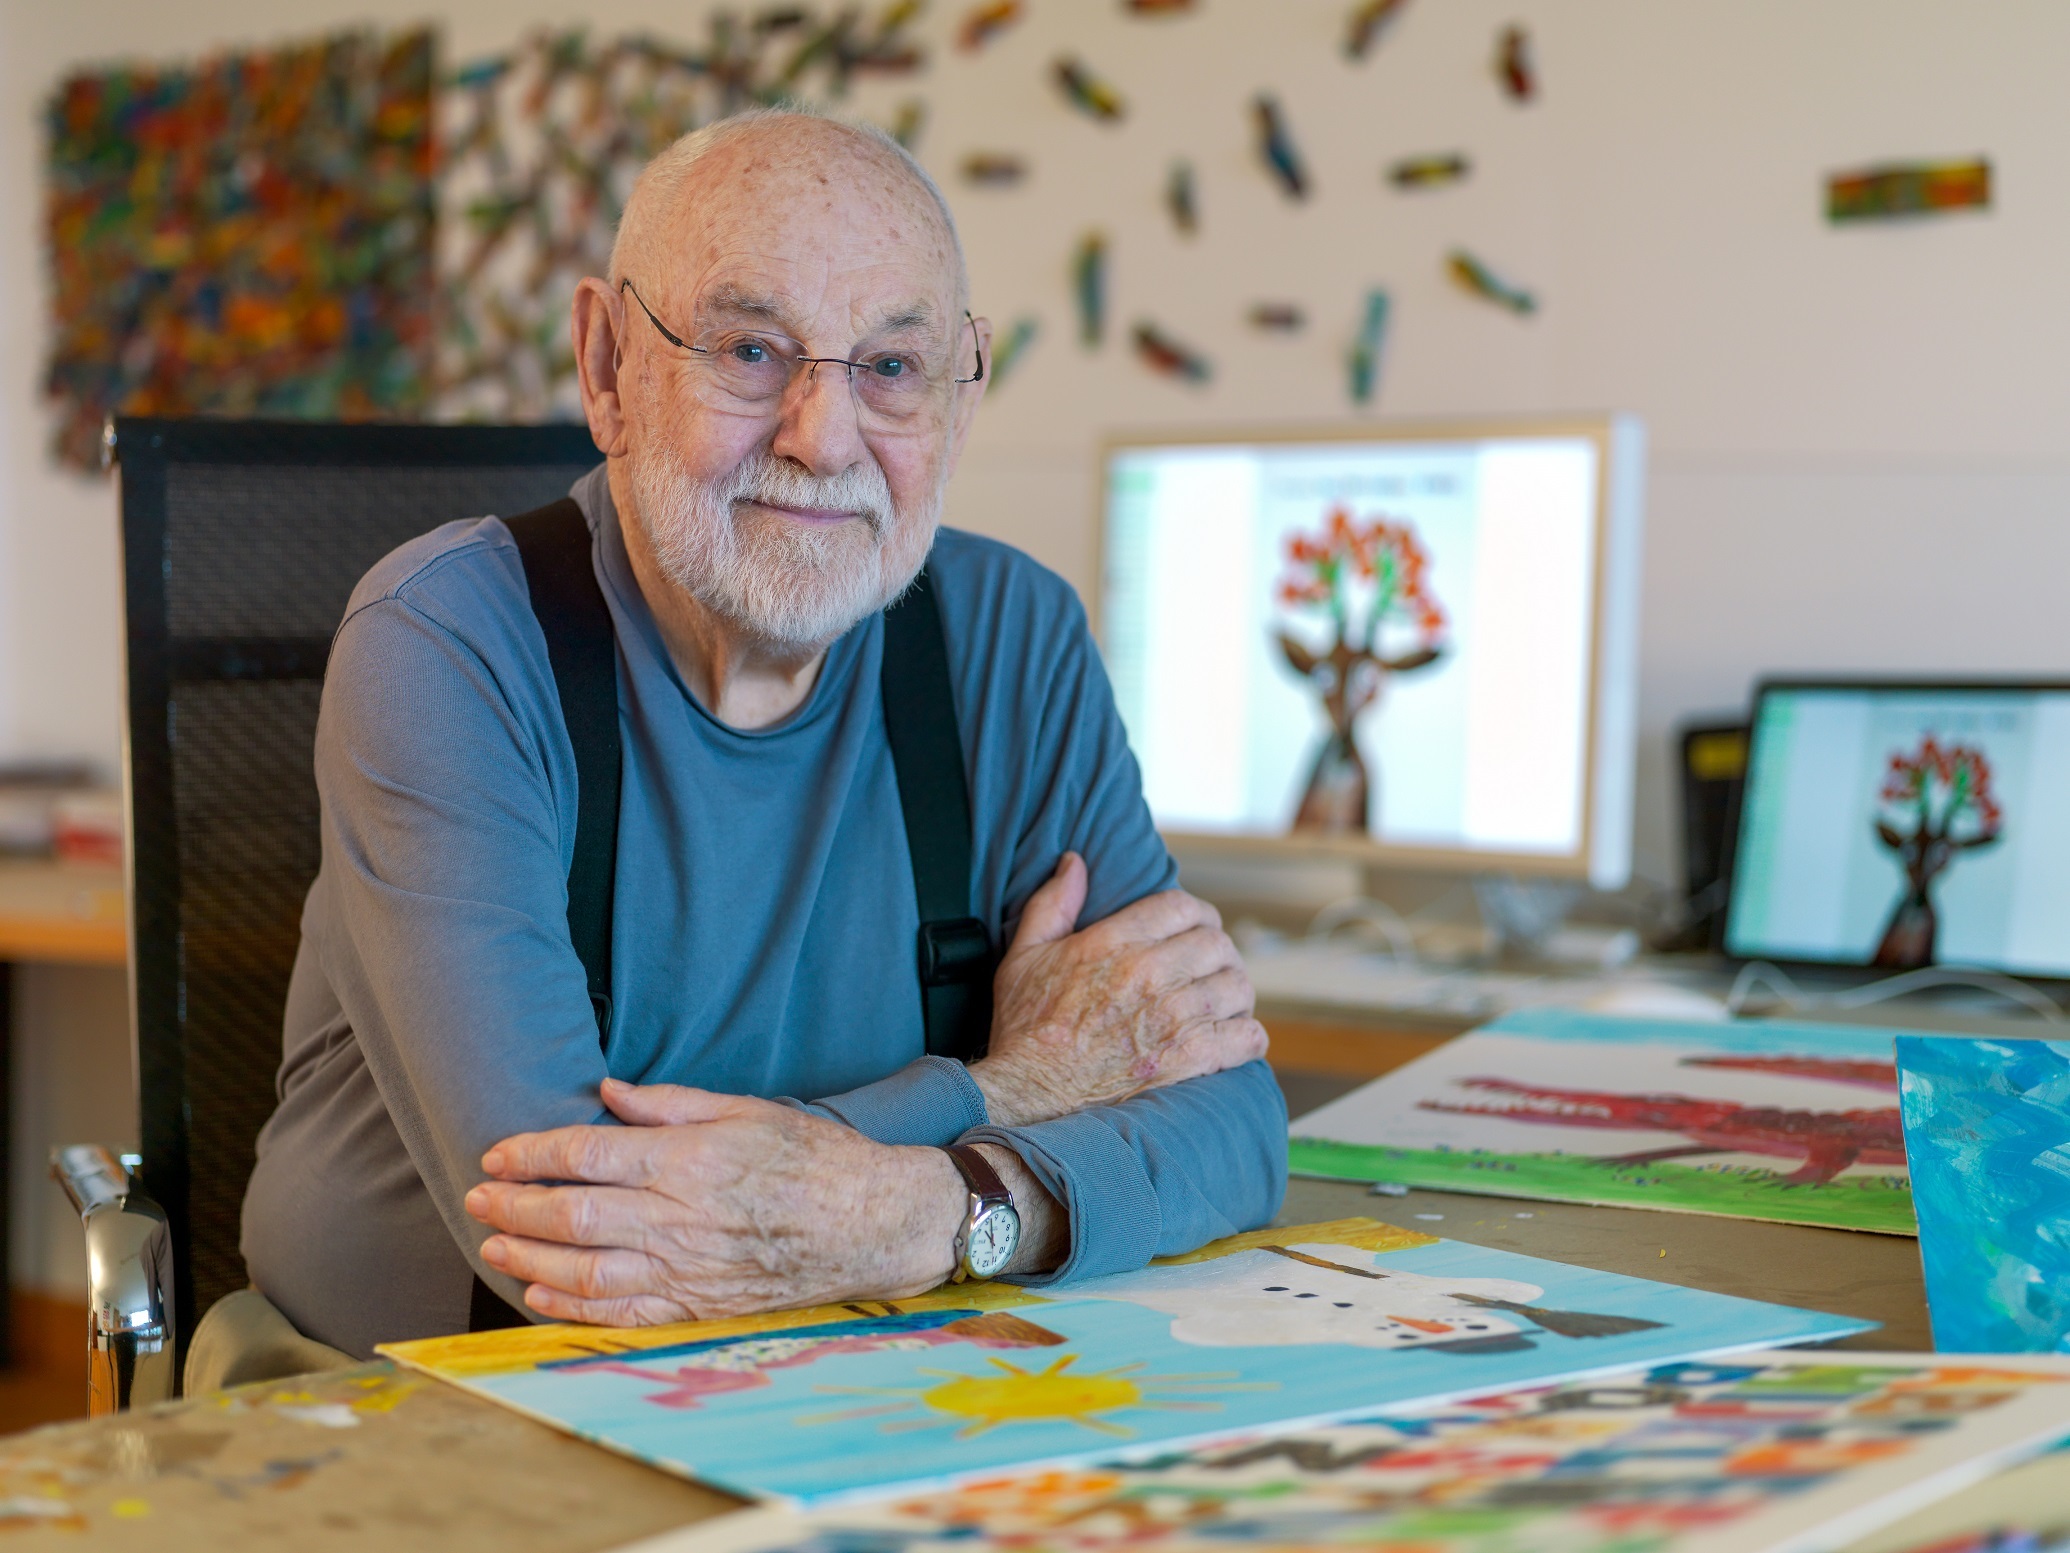 『THE ART OF ERIC CARLE エリック・カール展』